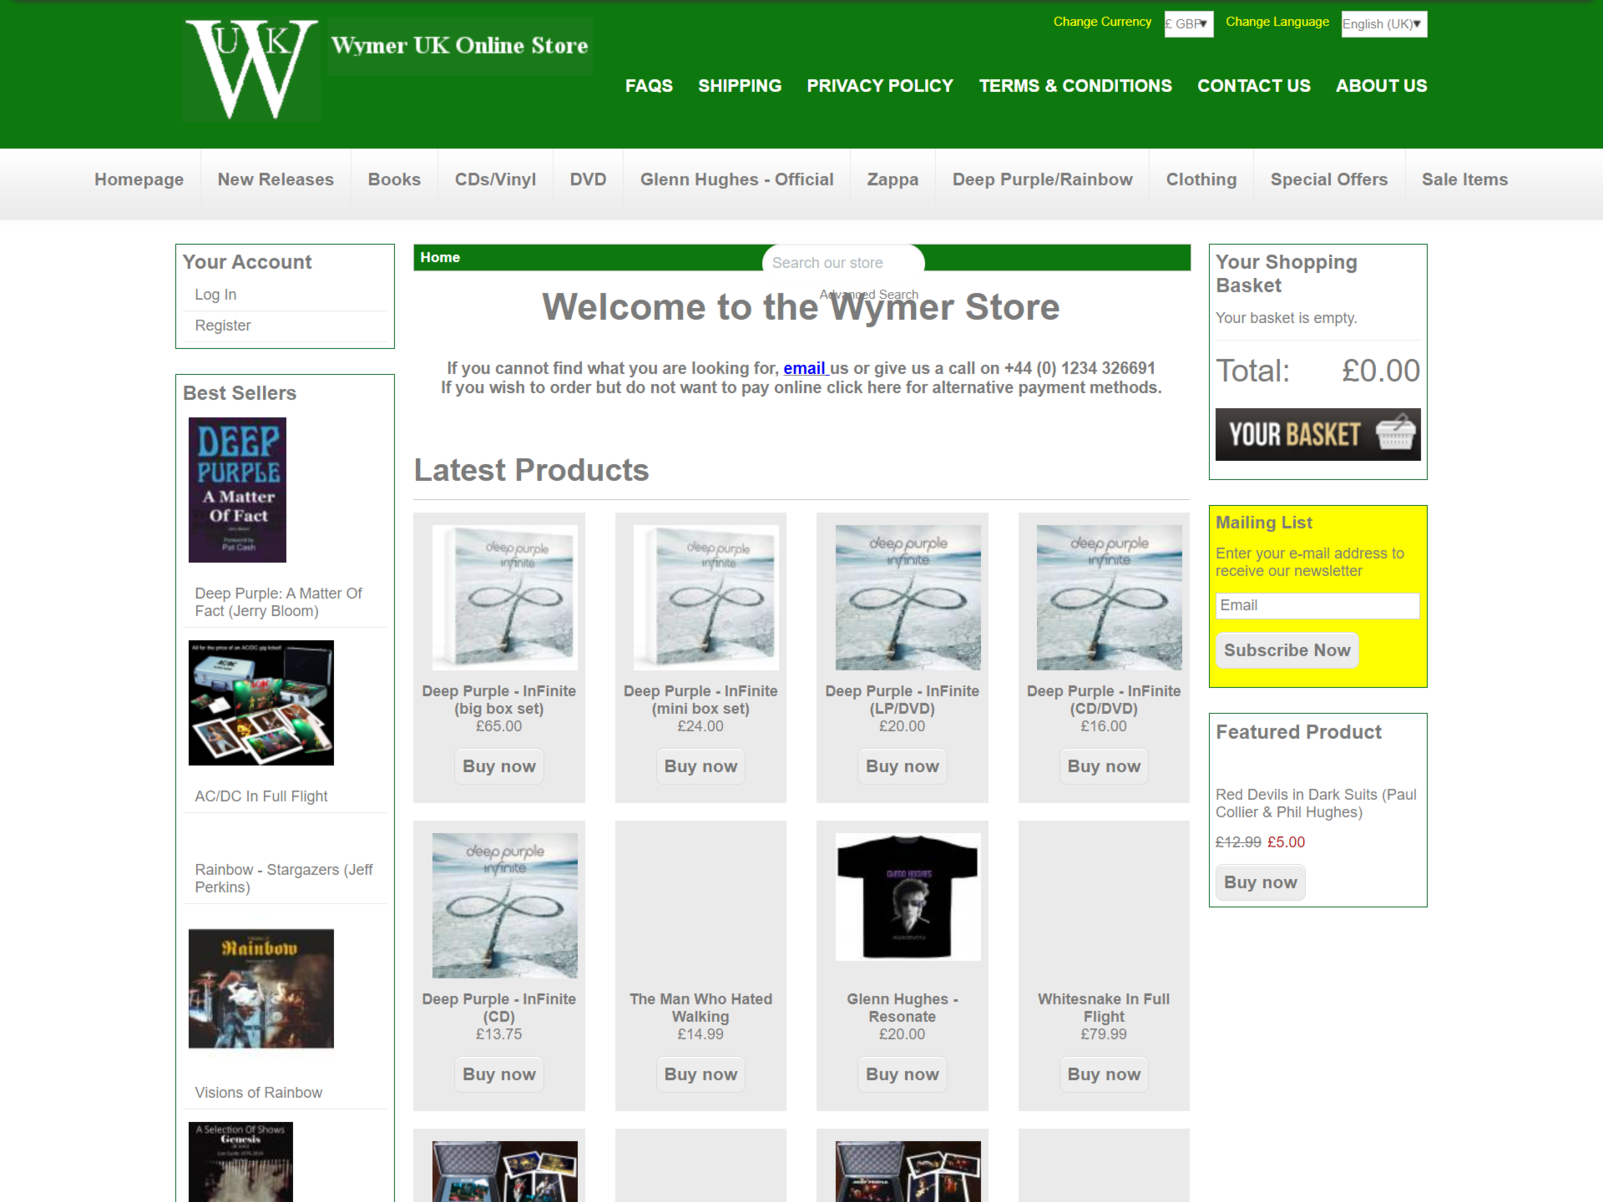 The previous website belonging to Wymer UK